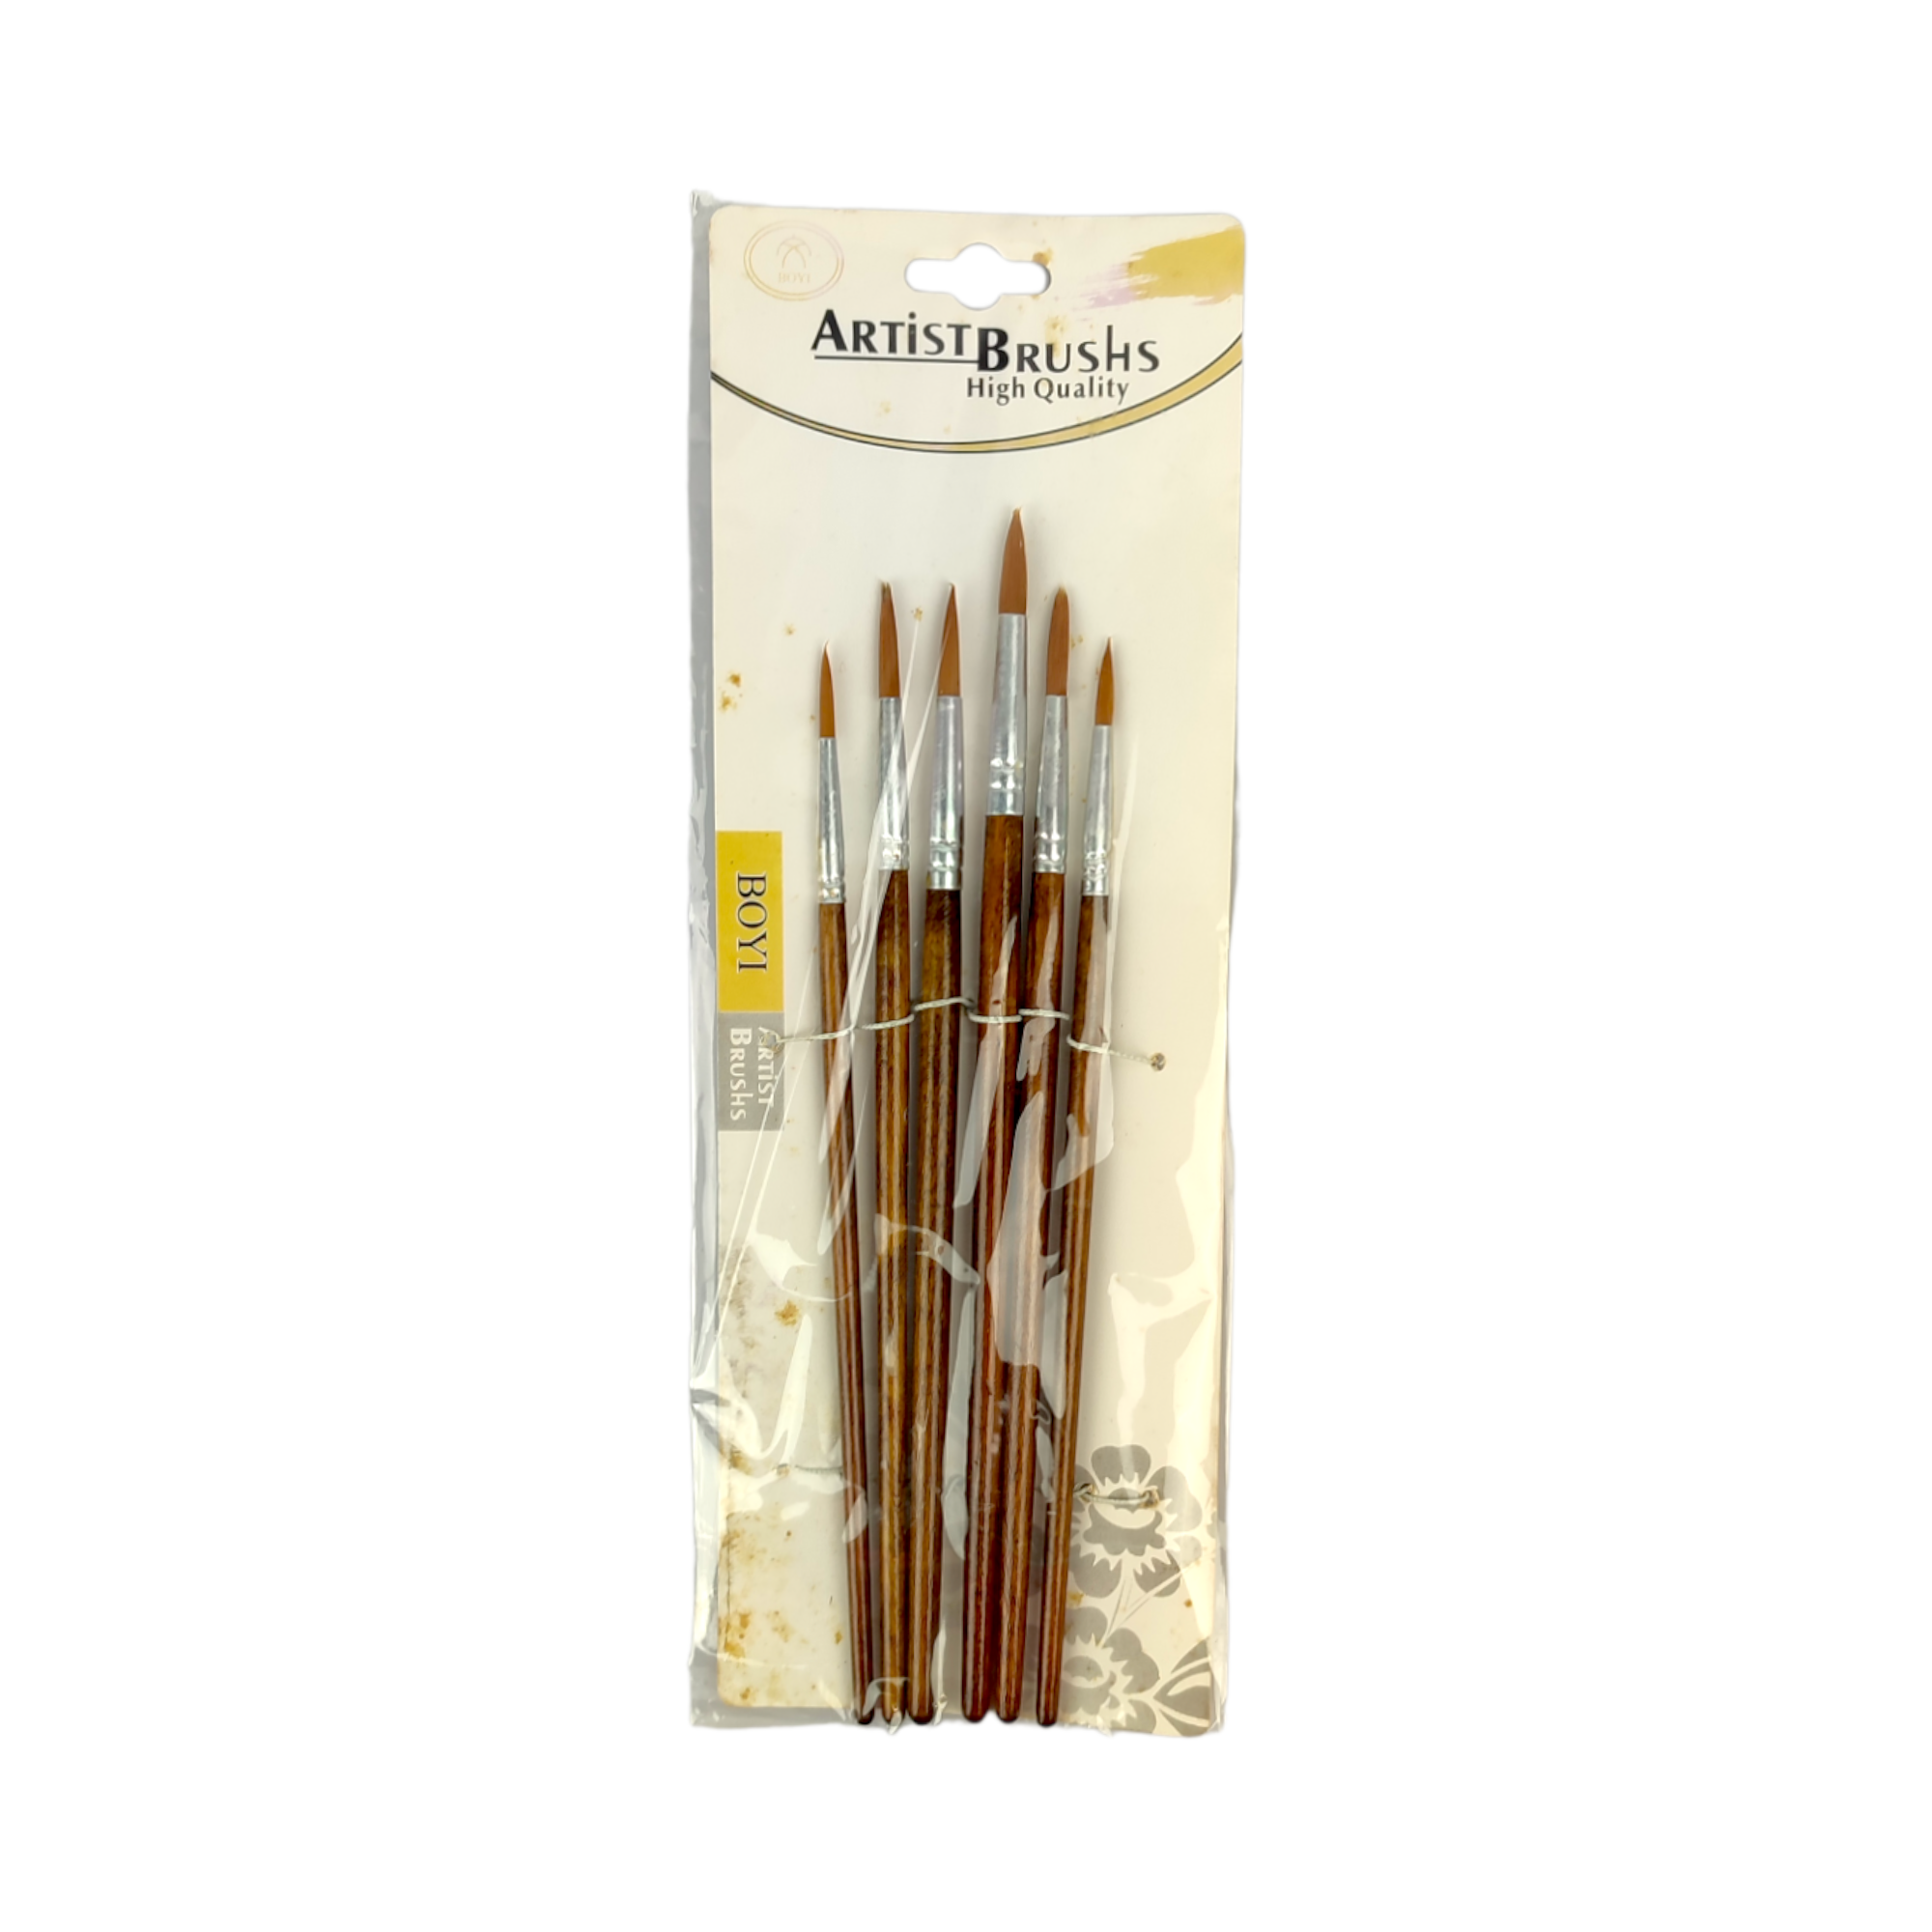 Artisan Brush & Specialty Accessories Deals - High quality artists paint,  watercolor, speciality brushes